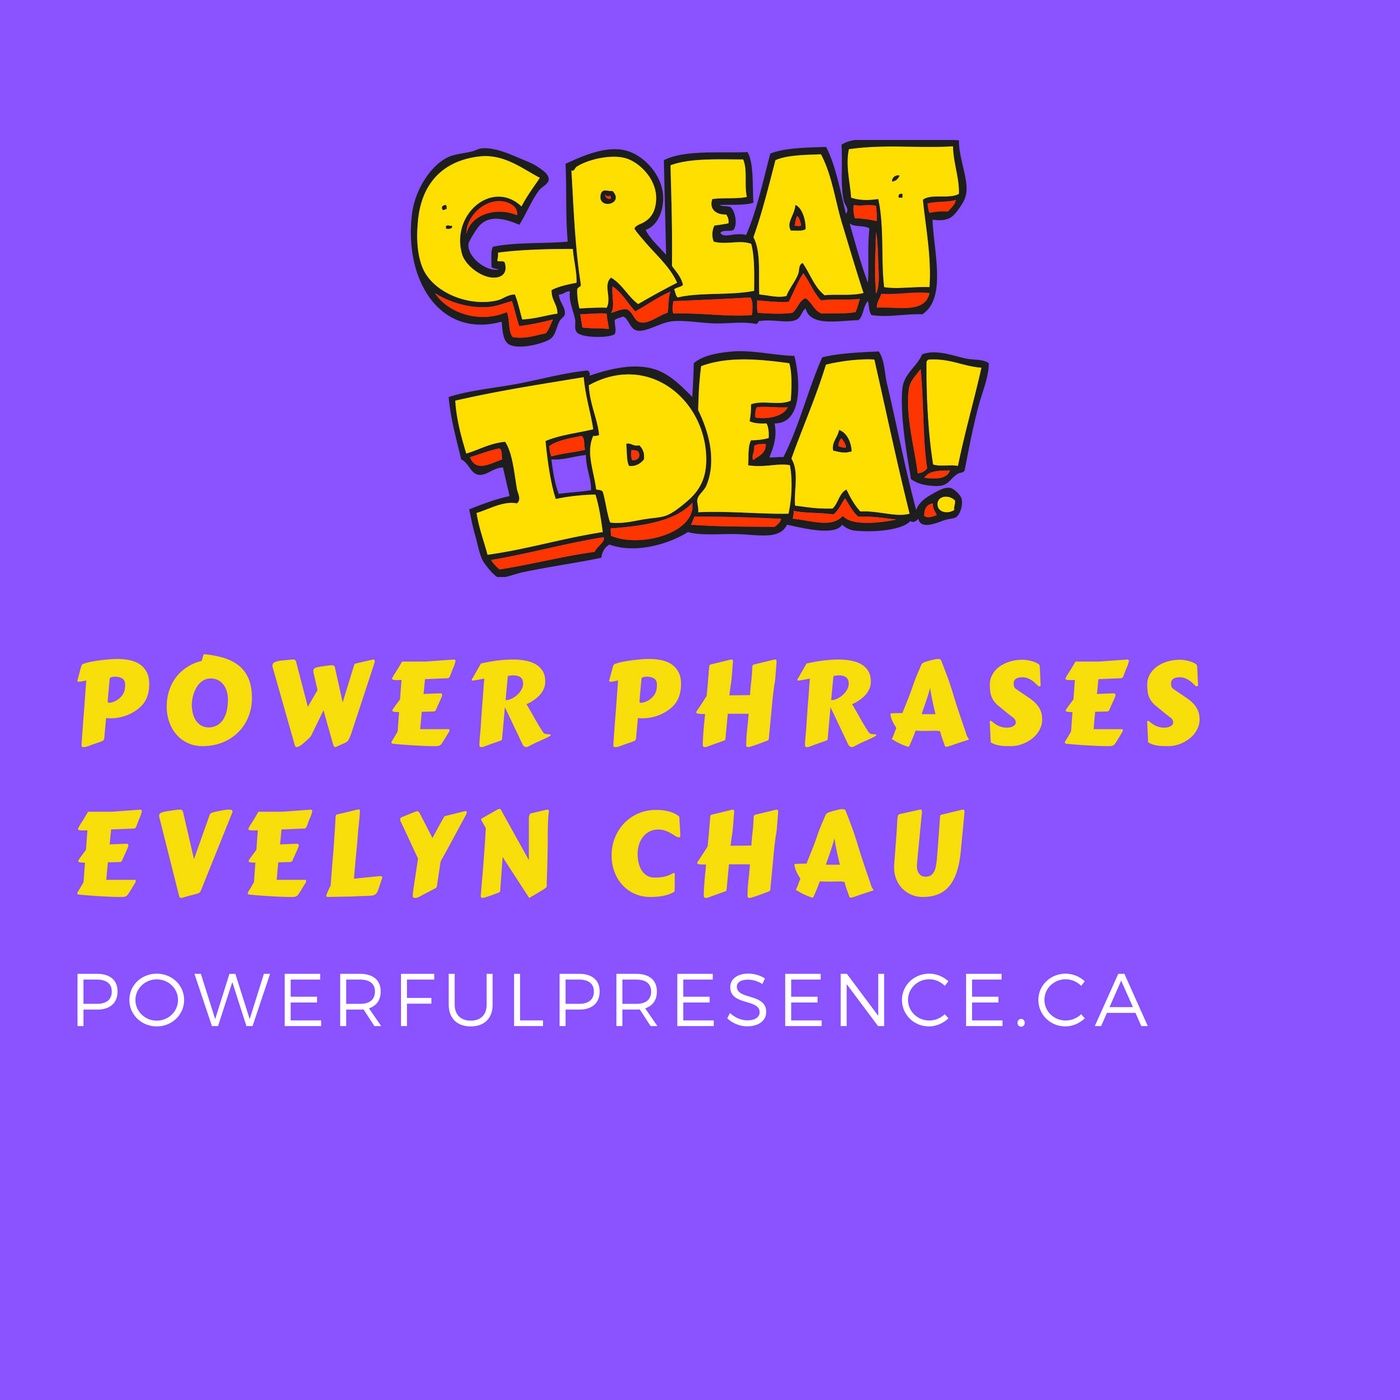 Power Phrases and Public Speaking with Evelyn Chau from Powerful Presence